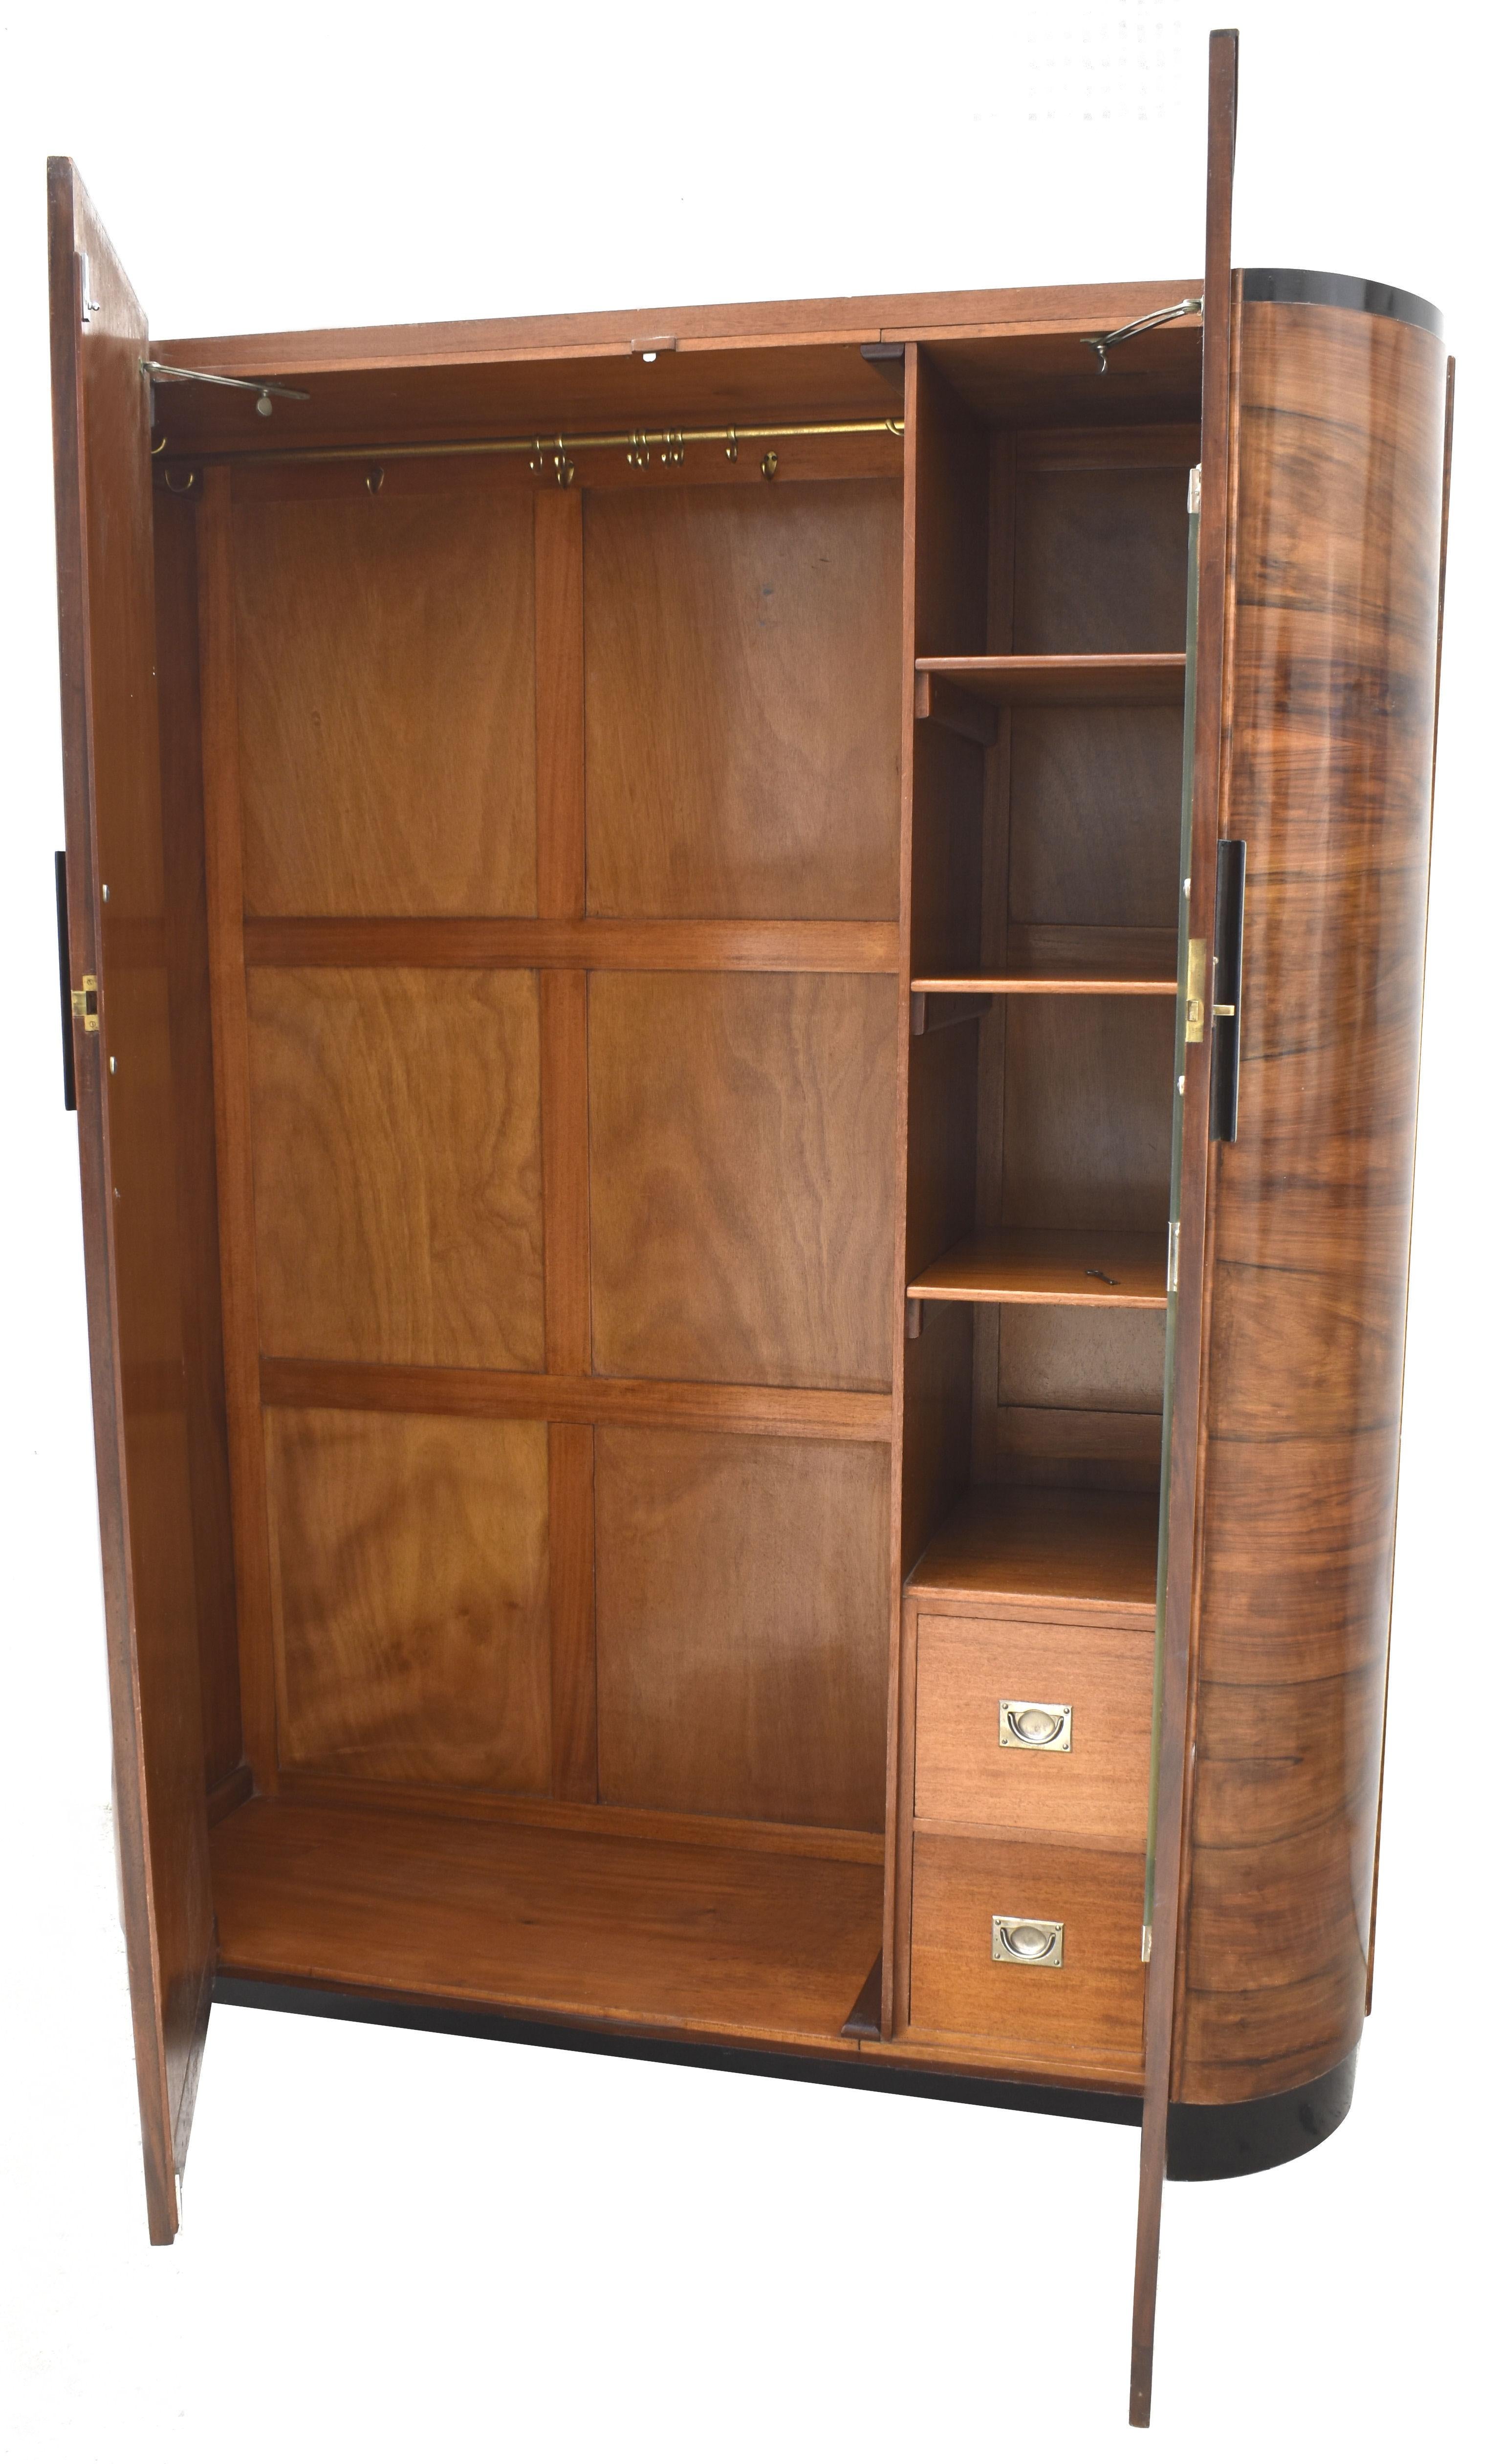 For your consideration is this very striking and imposing Art Deco double wardrobe with a modernist slant. The veneers are wonderful offering light and dark tones. Book paged walnut veneered doors with wide round shoulders that accented by ebonized